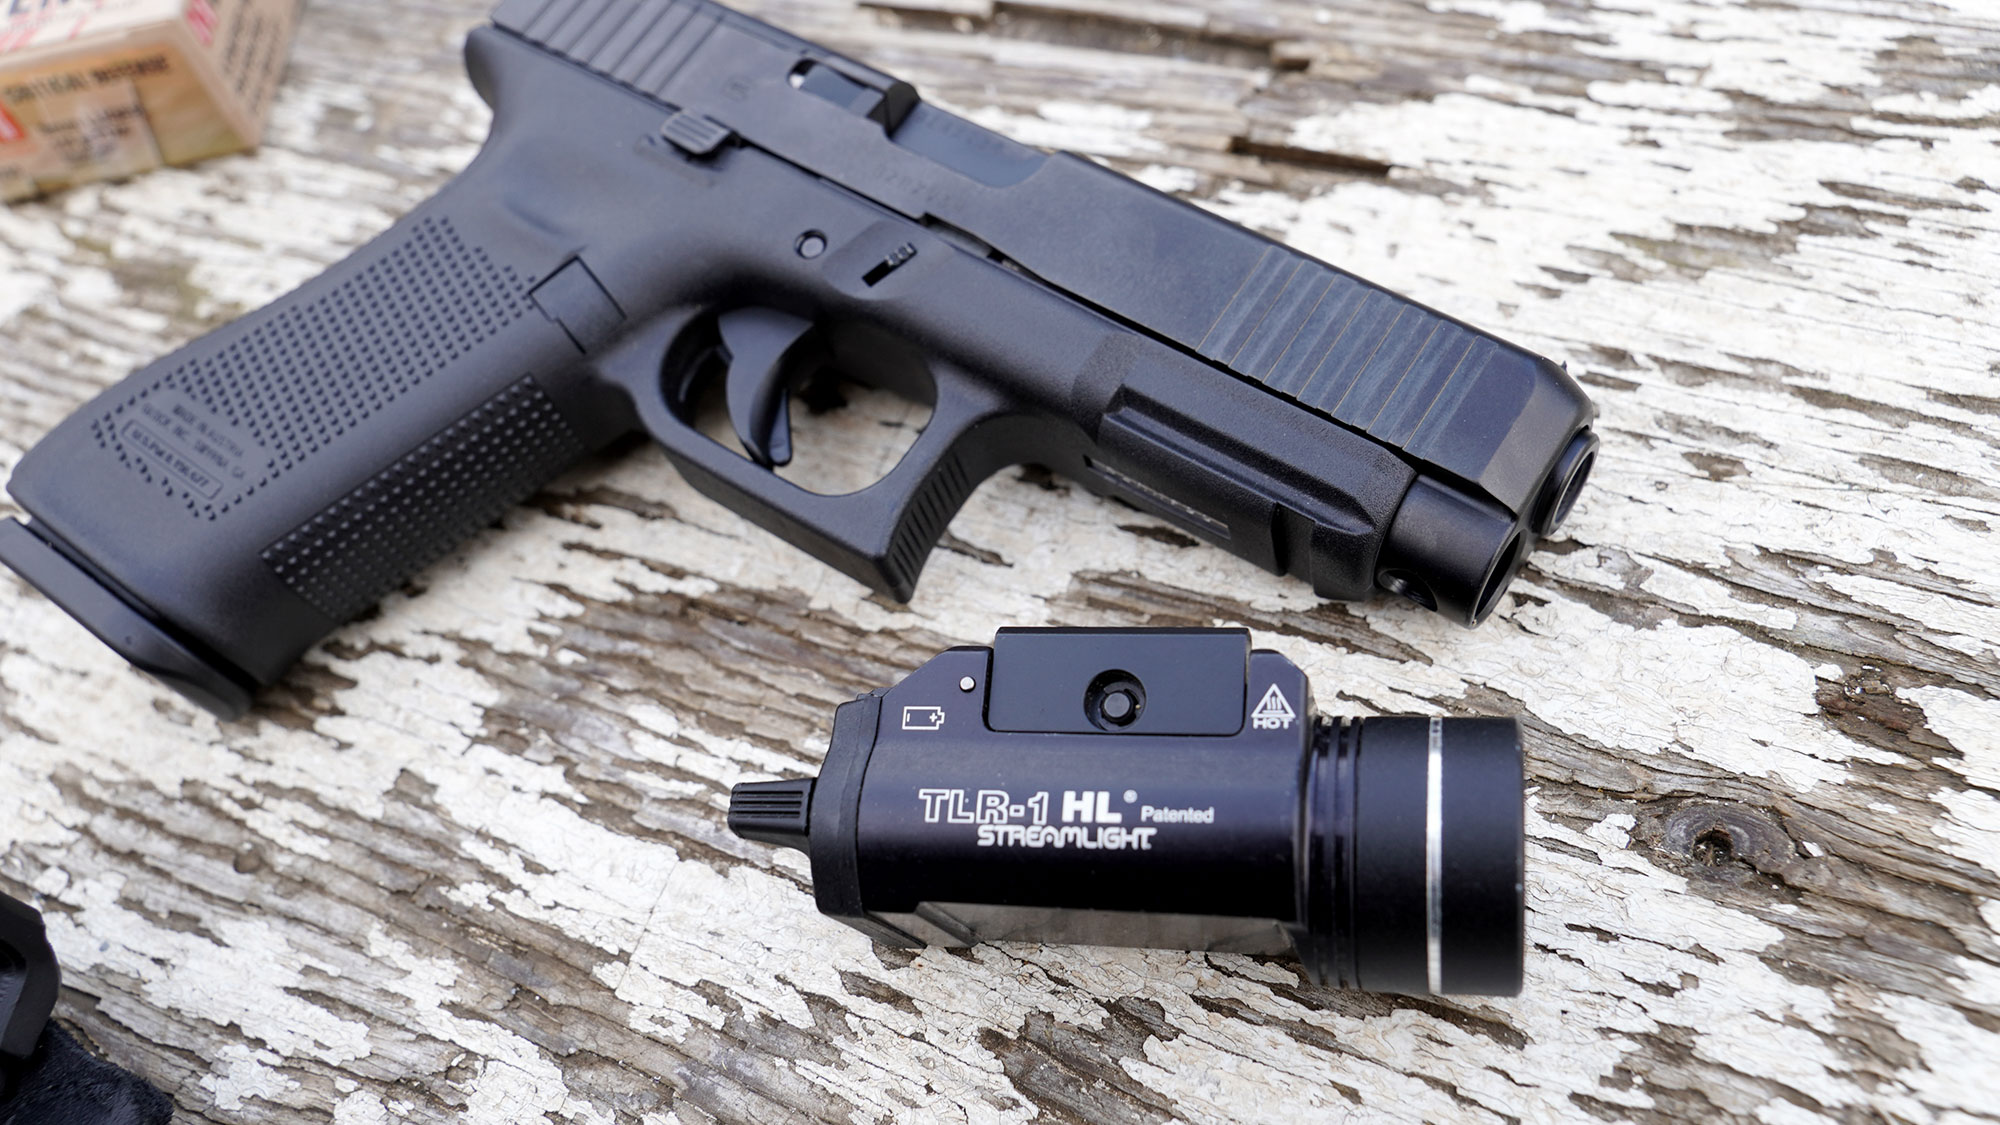 Streamlight TLR-1 weapon light and pistol on bench